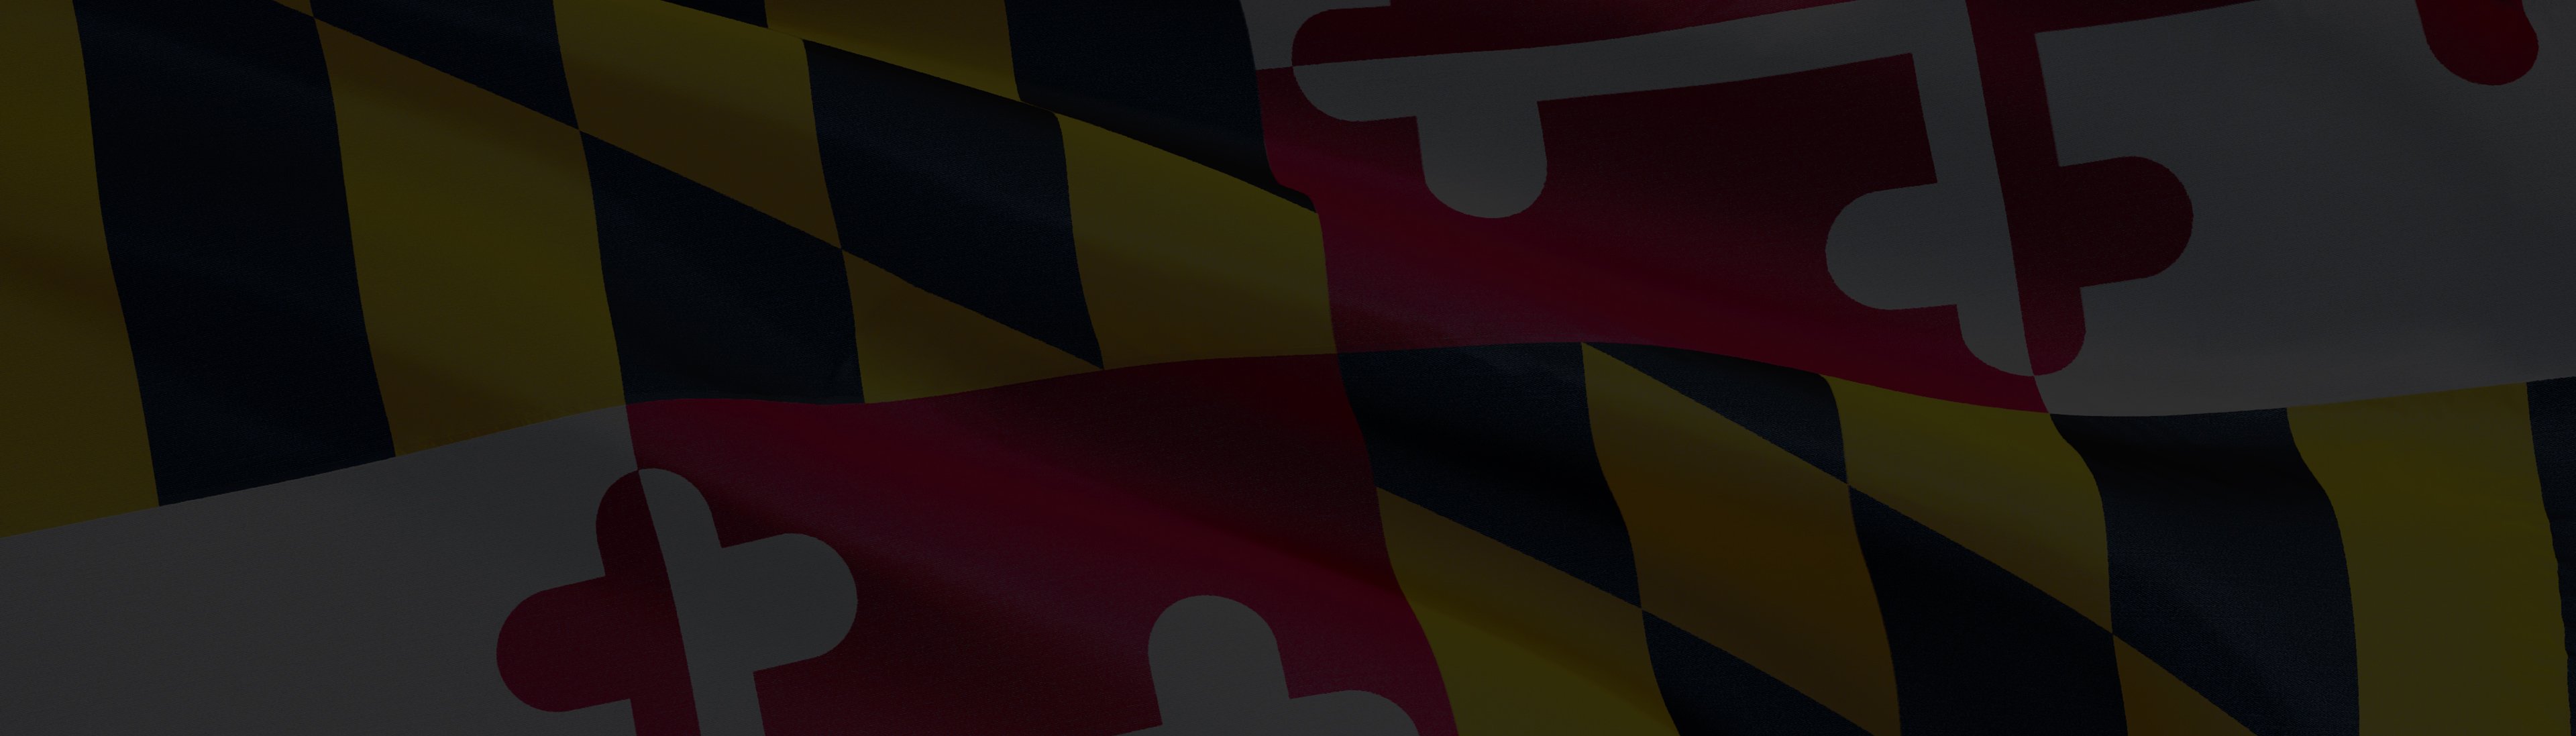 MSBA Panel Reviews Recent Notable Maryland Appellate Decisions